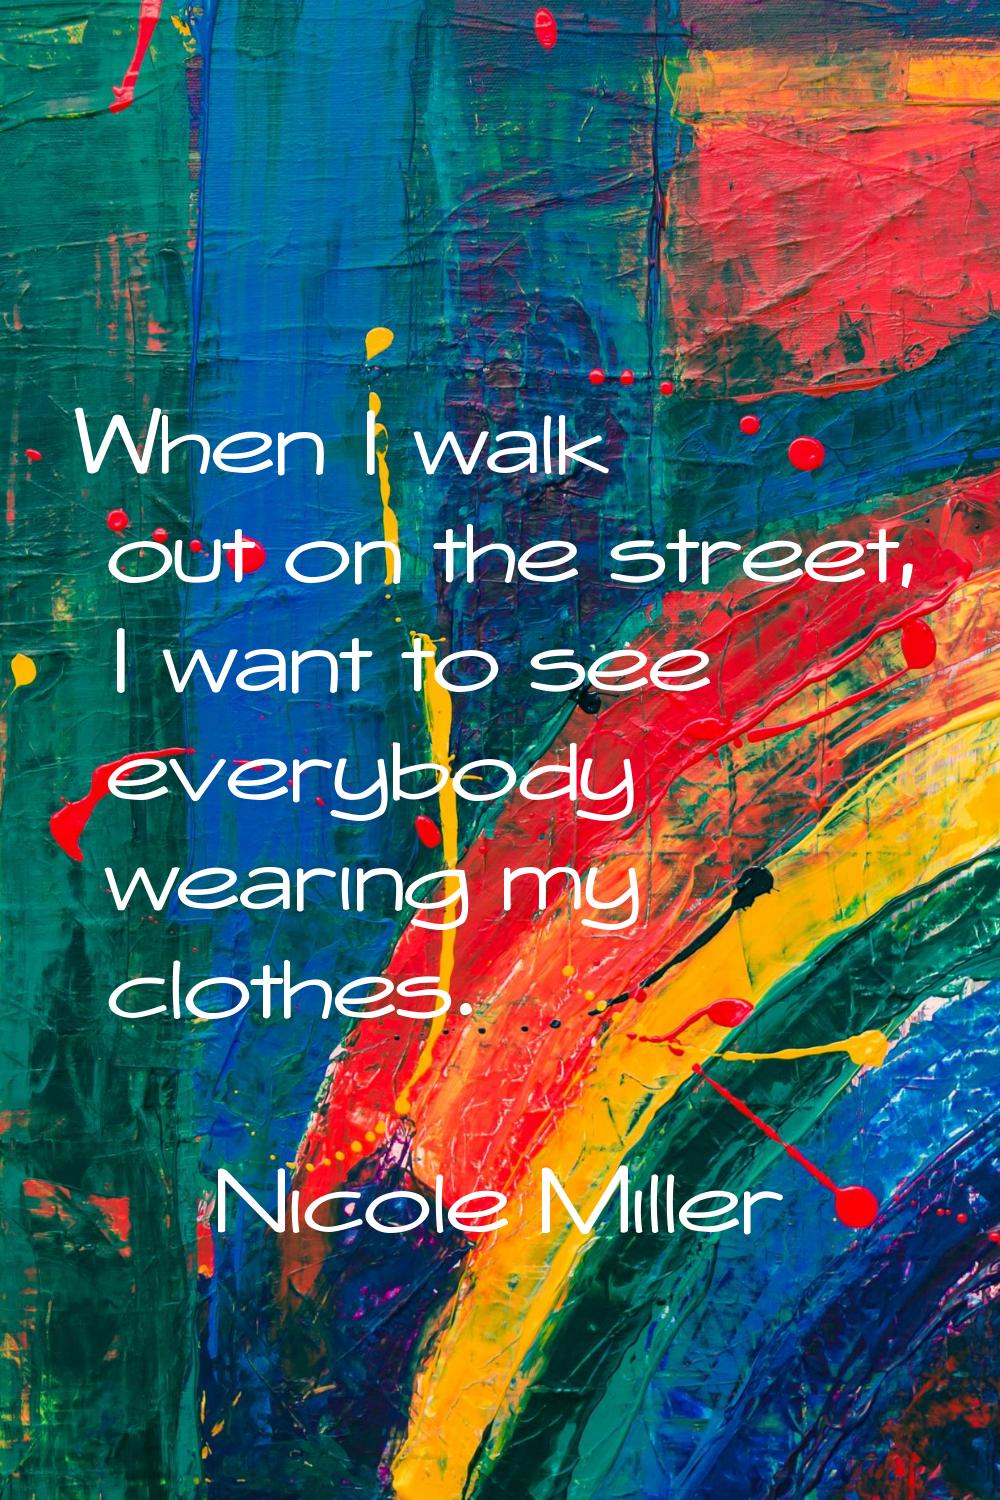 When I walk out on the street, I want to see everybody wearing my clothes.